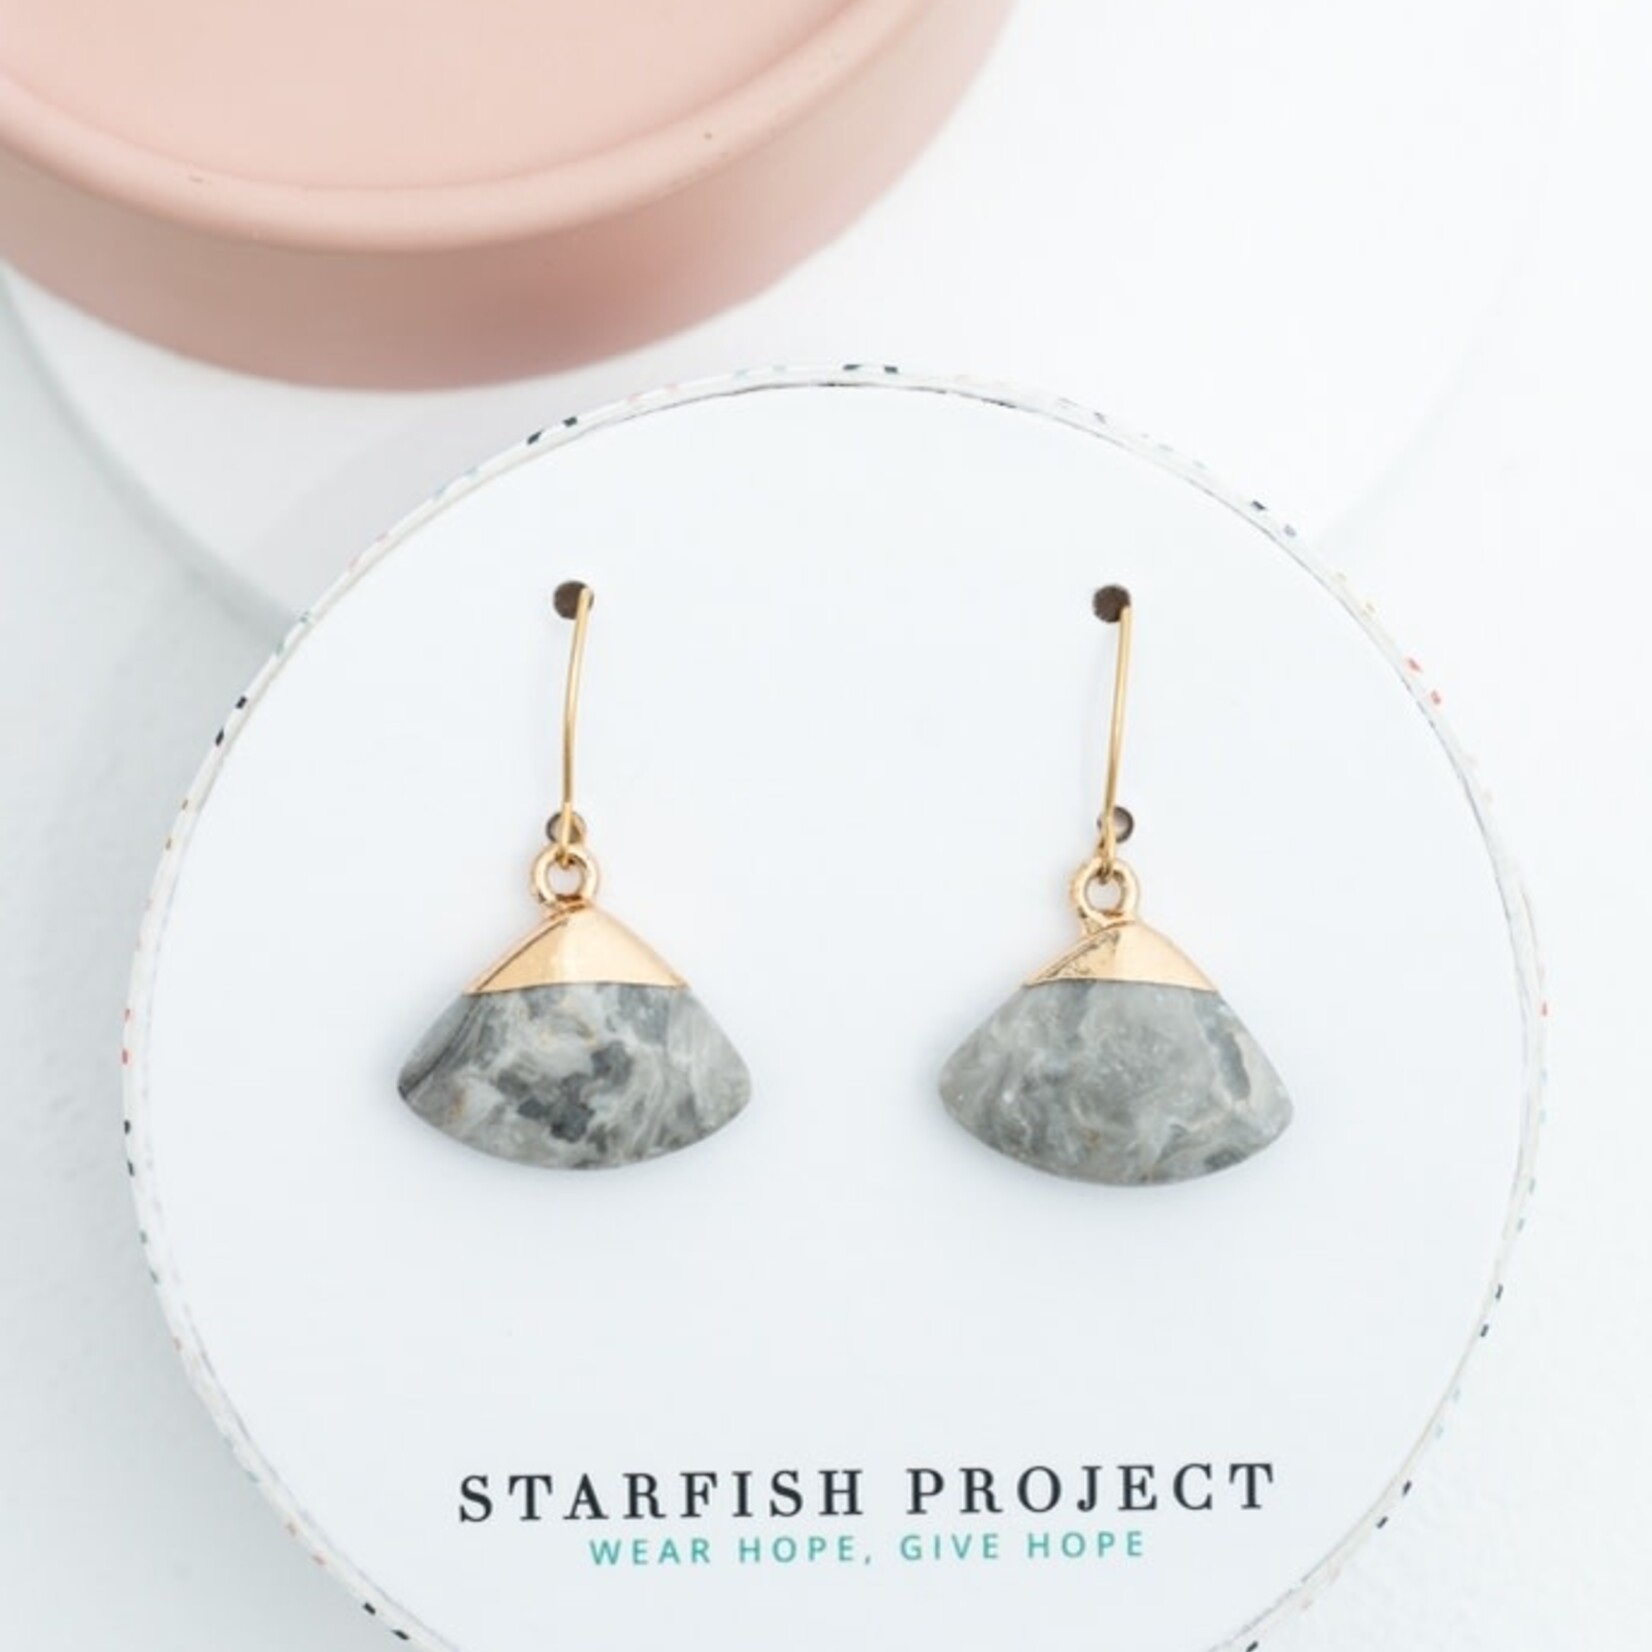 The Starfish Project Fan Drop Earrings in Charcoal, China